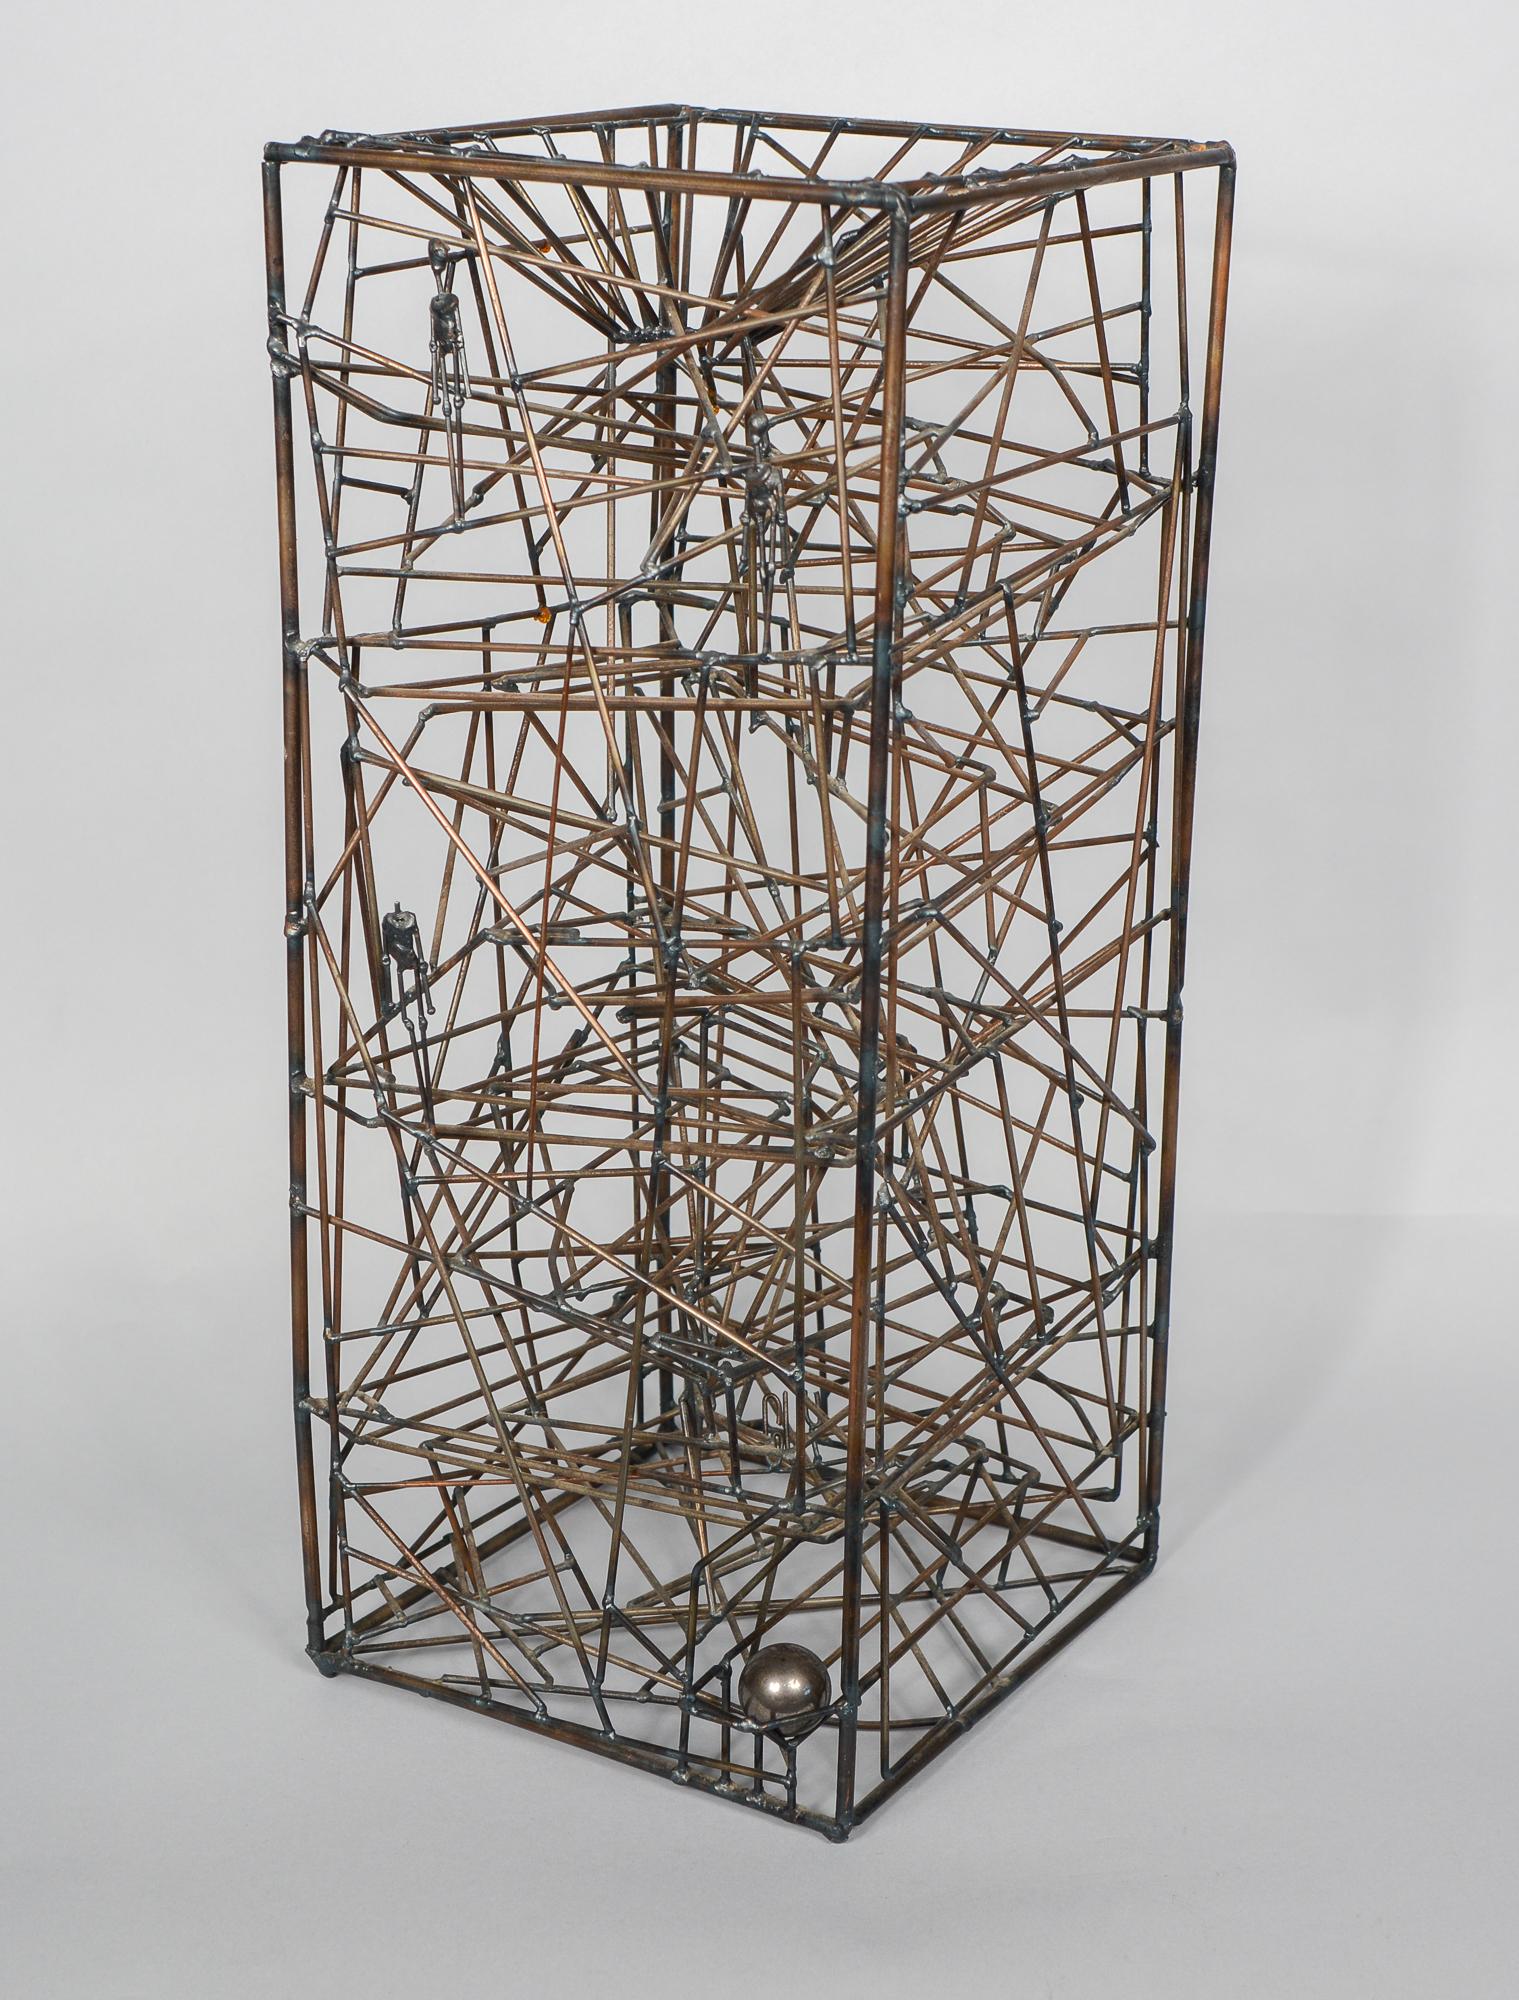 Kinetic wire sculpture by California artist Guy Pullen. Three steel ball bearings are dropped in the top of the tower and they follow a maze like track to the bottom. There are three figures on one side of the sculpture. There is a break to one weld